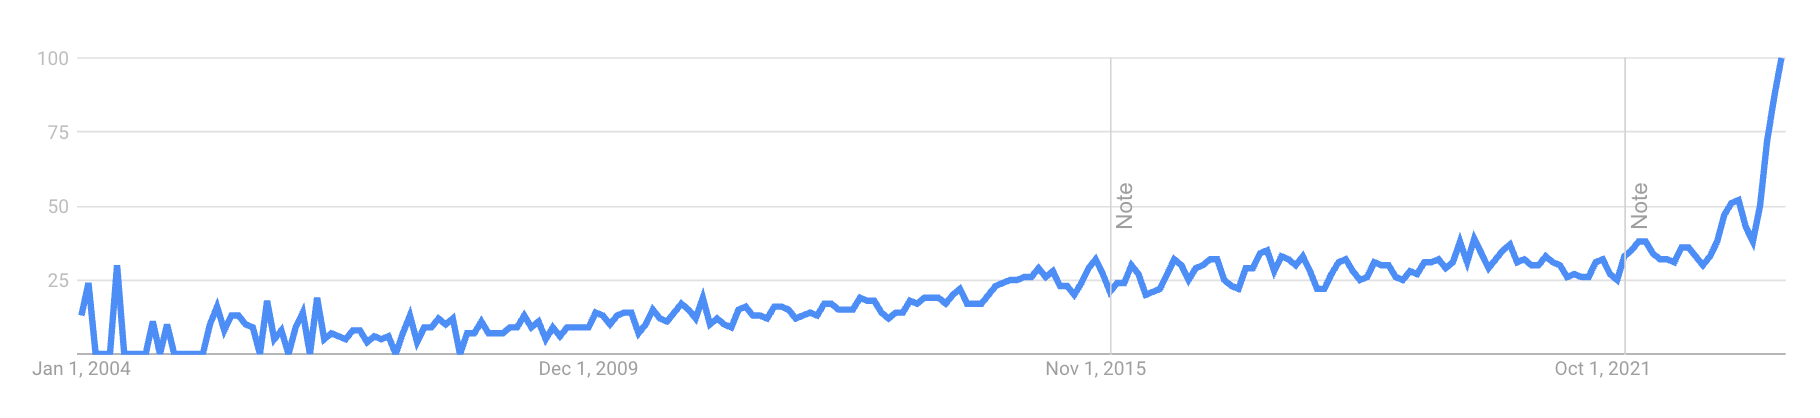 google trends graph showing sharp climb in the last year for the word 'multifaceted'